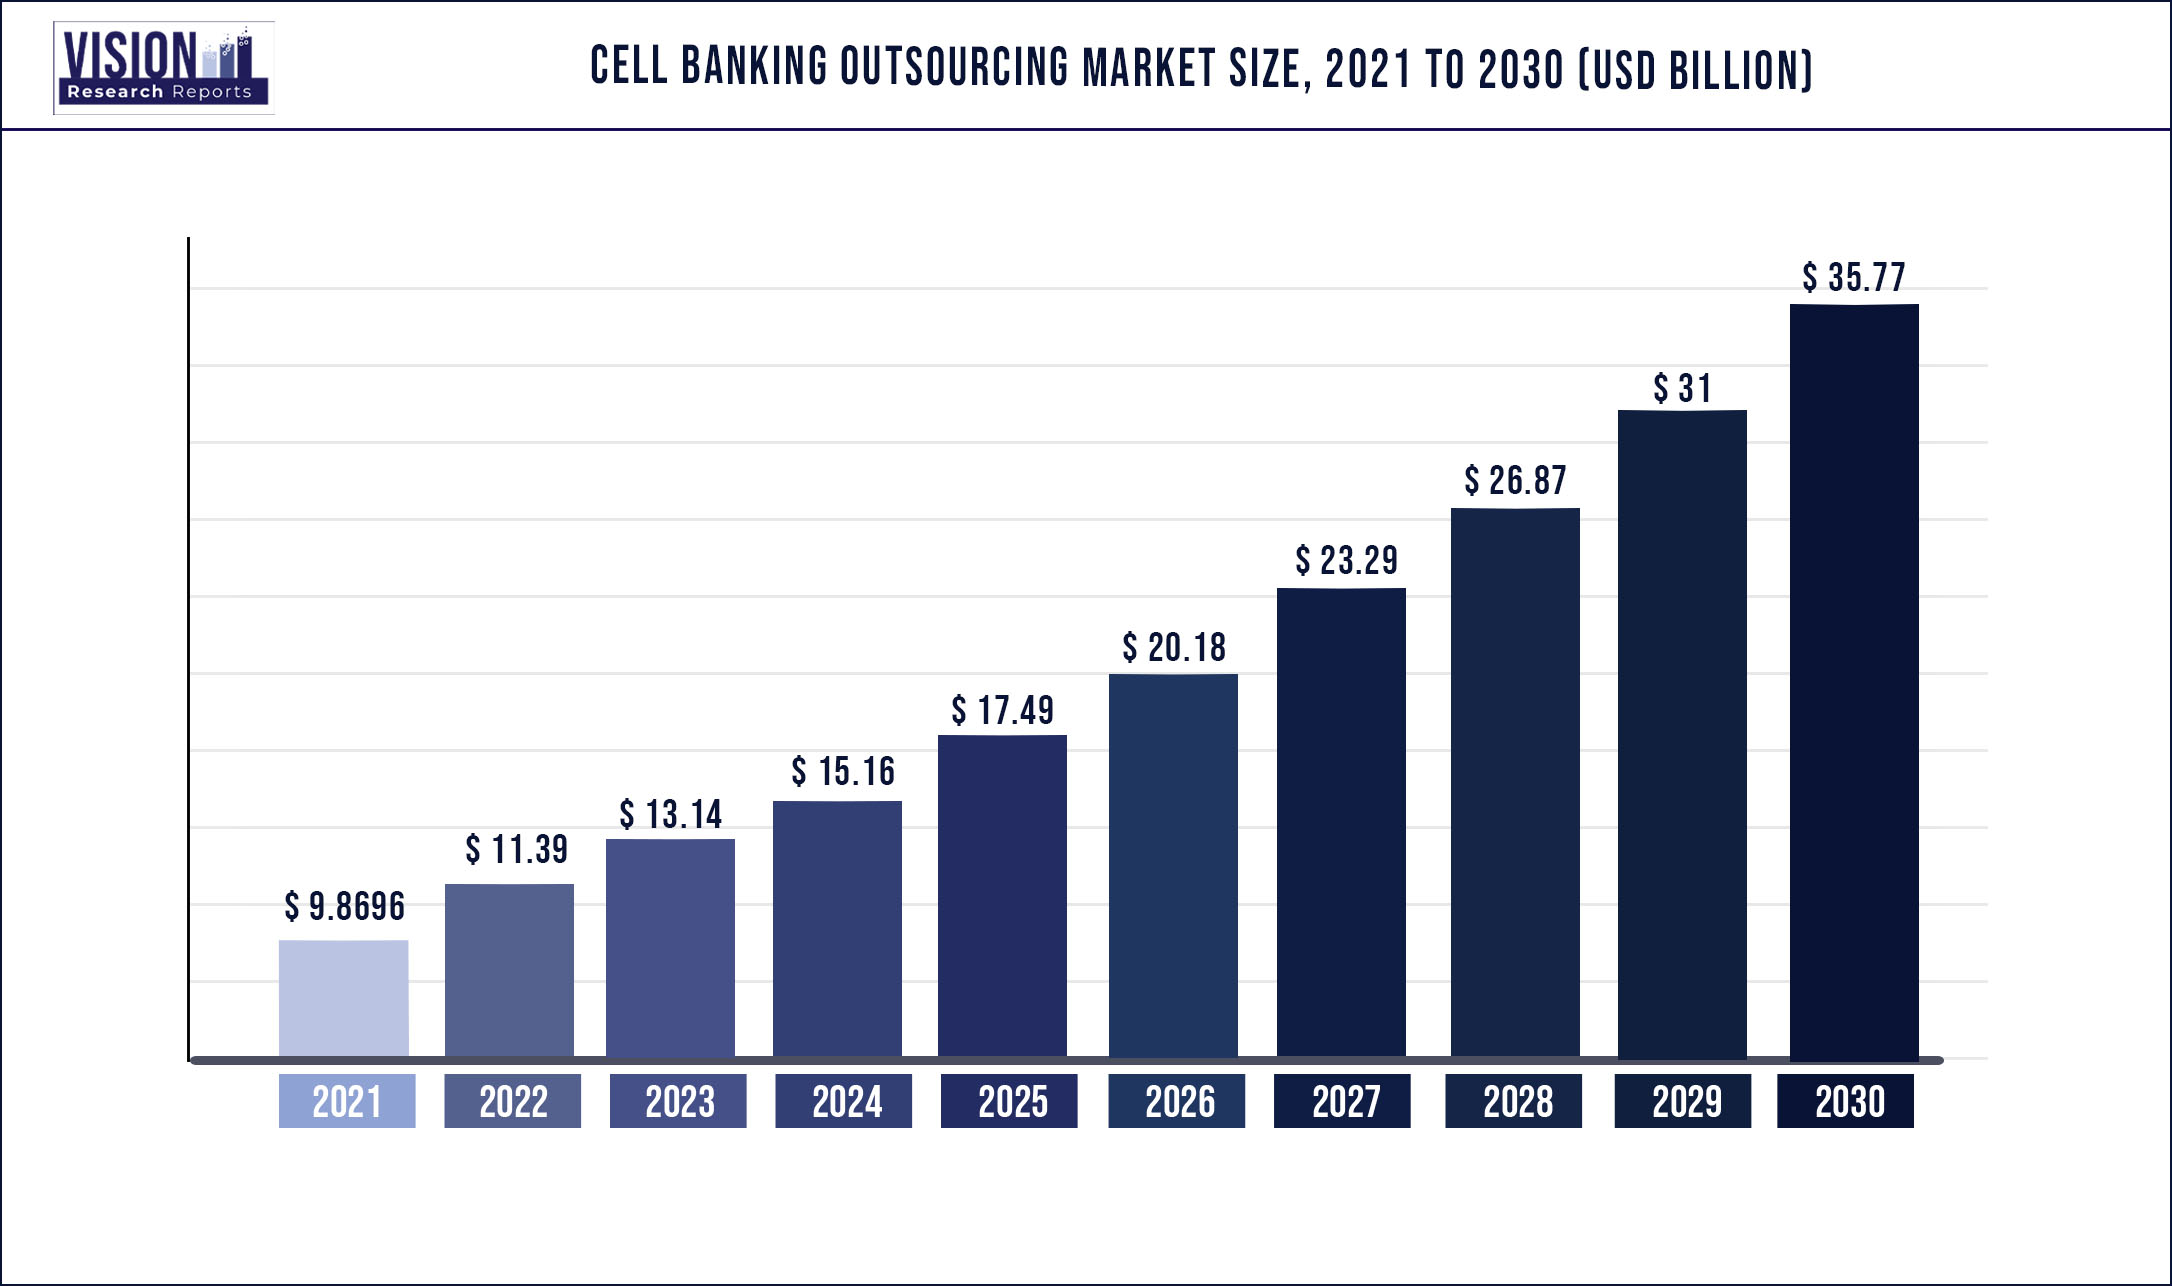 Cell Banking Outsourcing Market Size 2021 to 2030